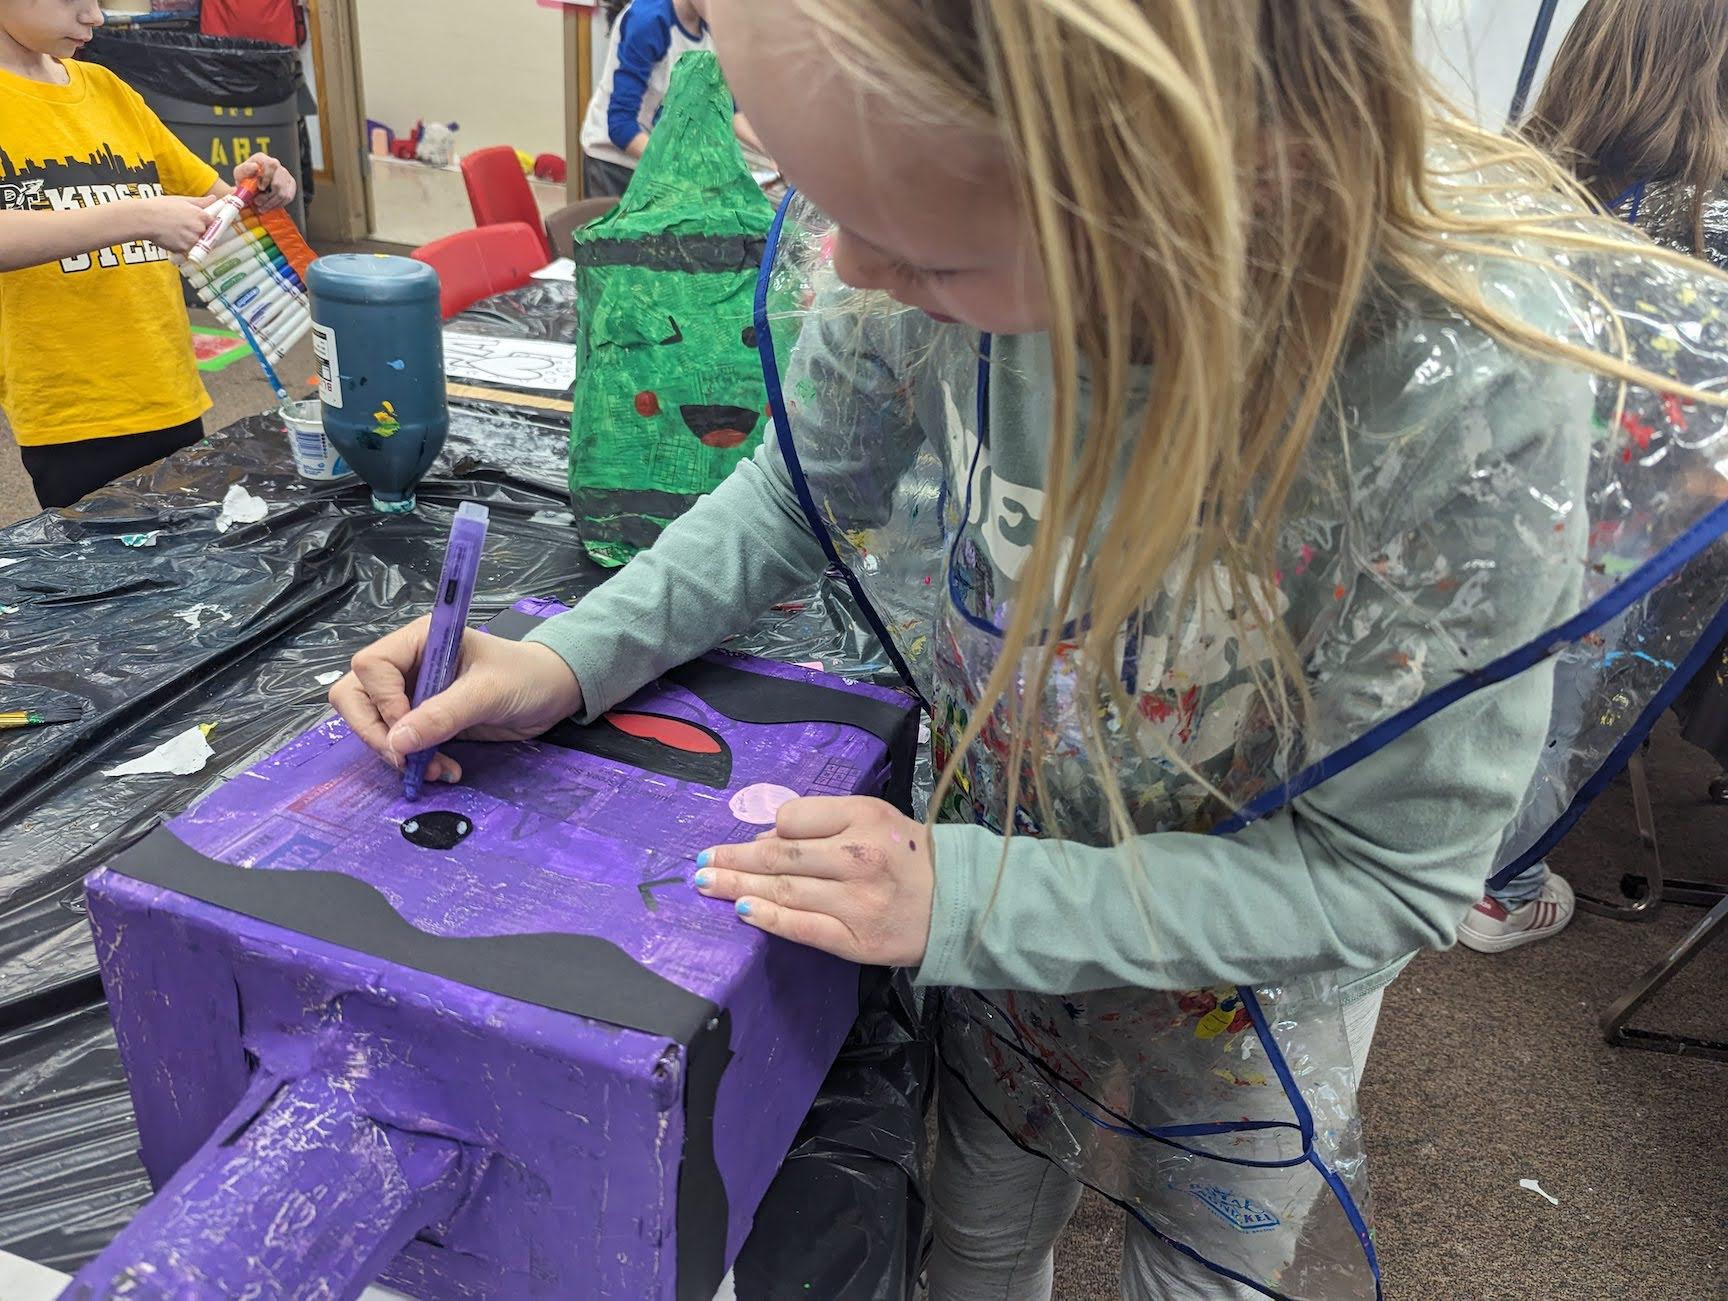 3rd-grader Avery Simmons adds some finishing touches